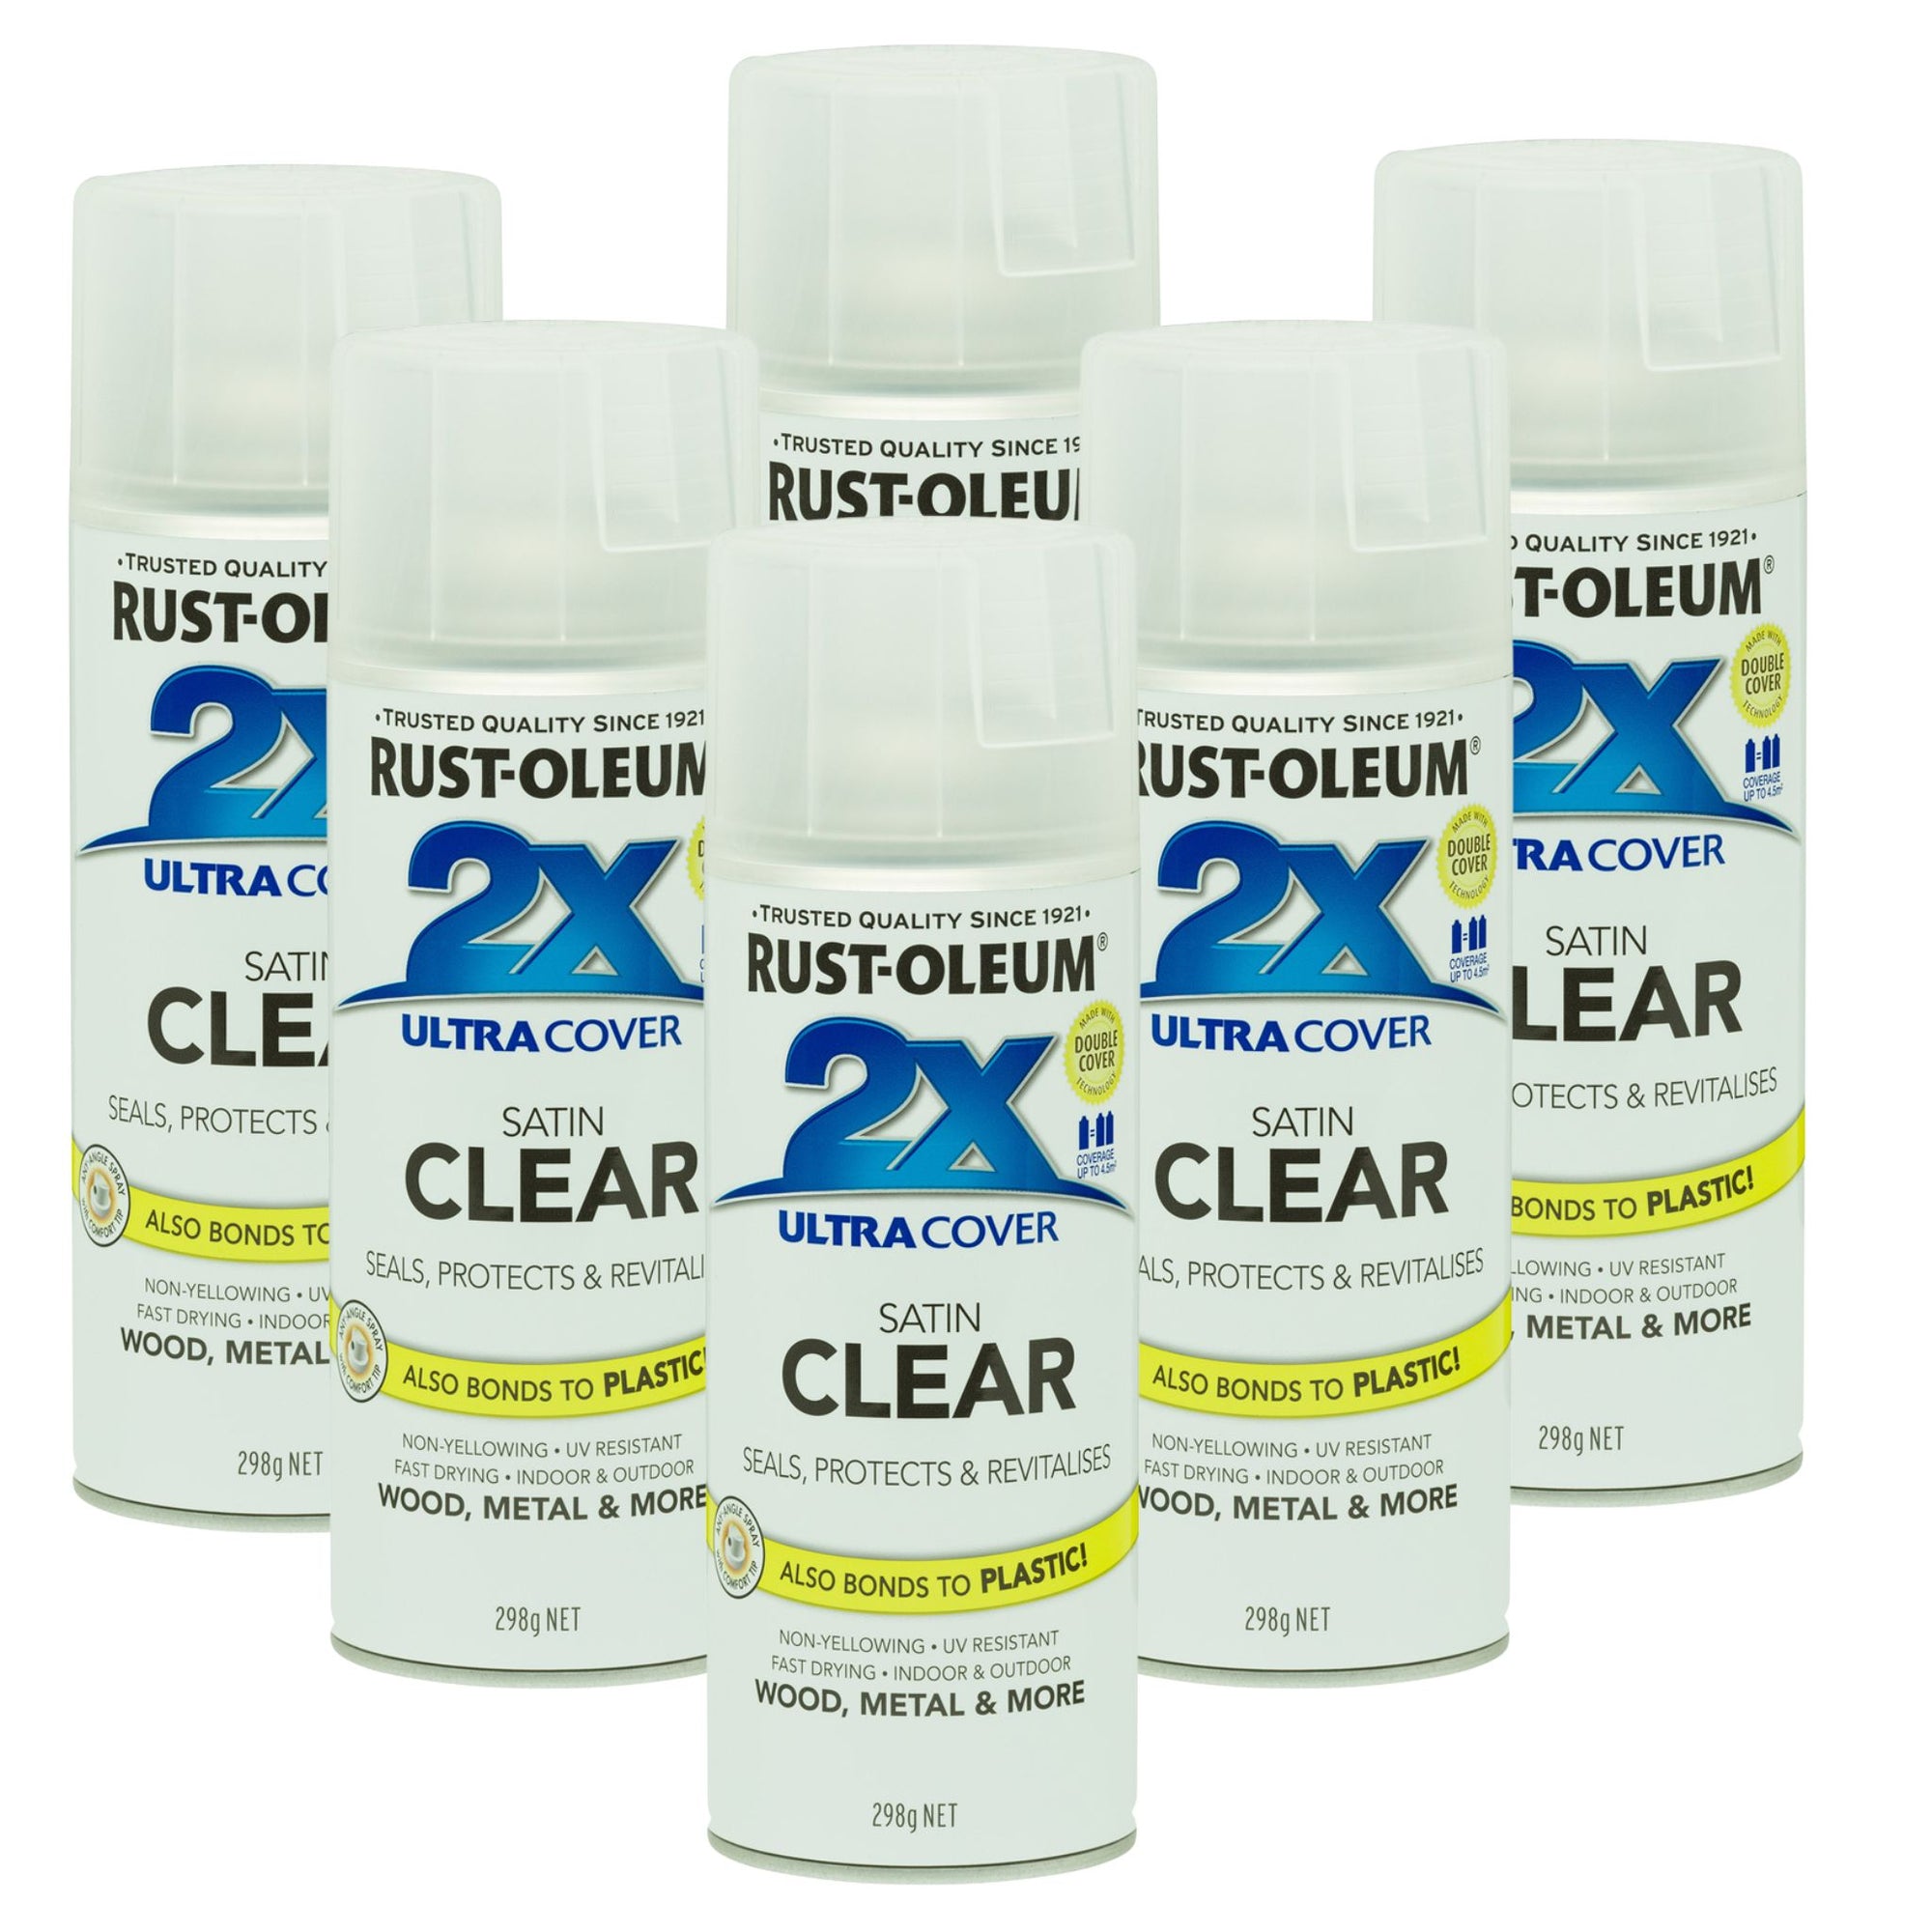 Rust-Oleum 2x Ultracover | Satin Clear (6 Cans) - South East Clearance Centre